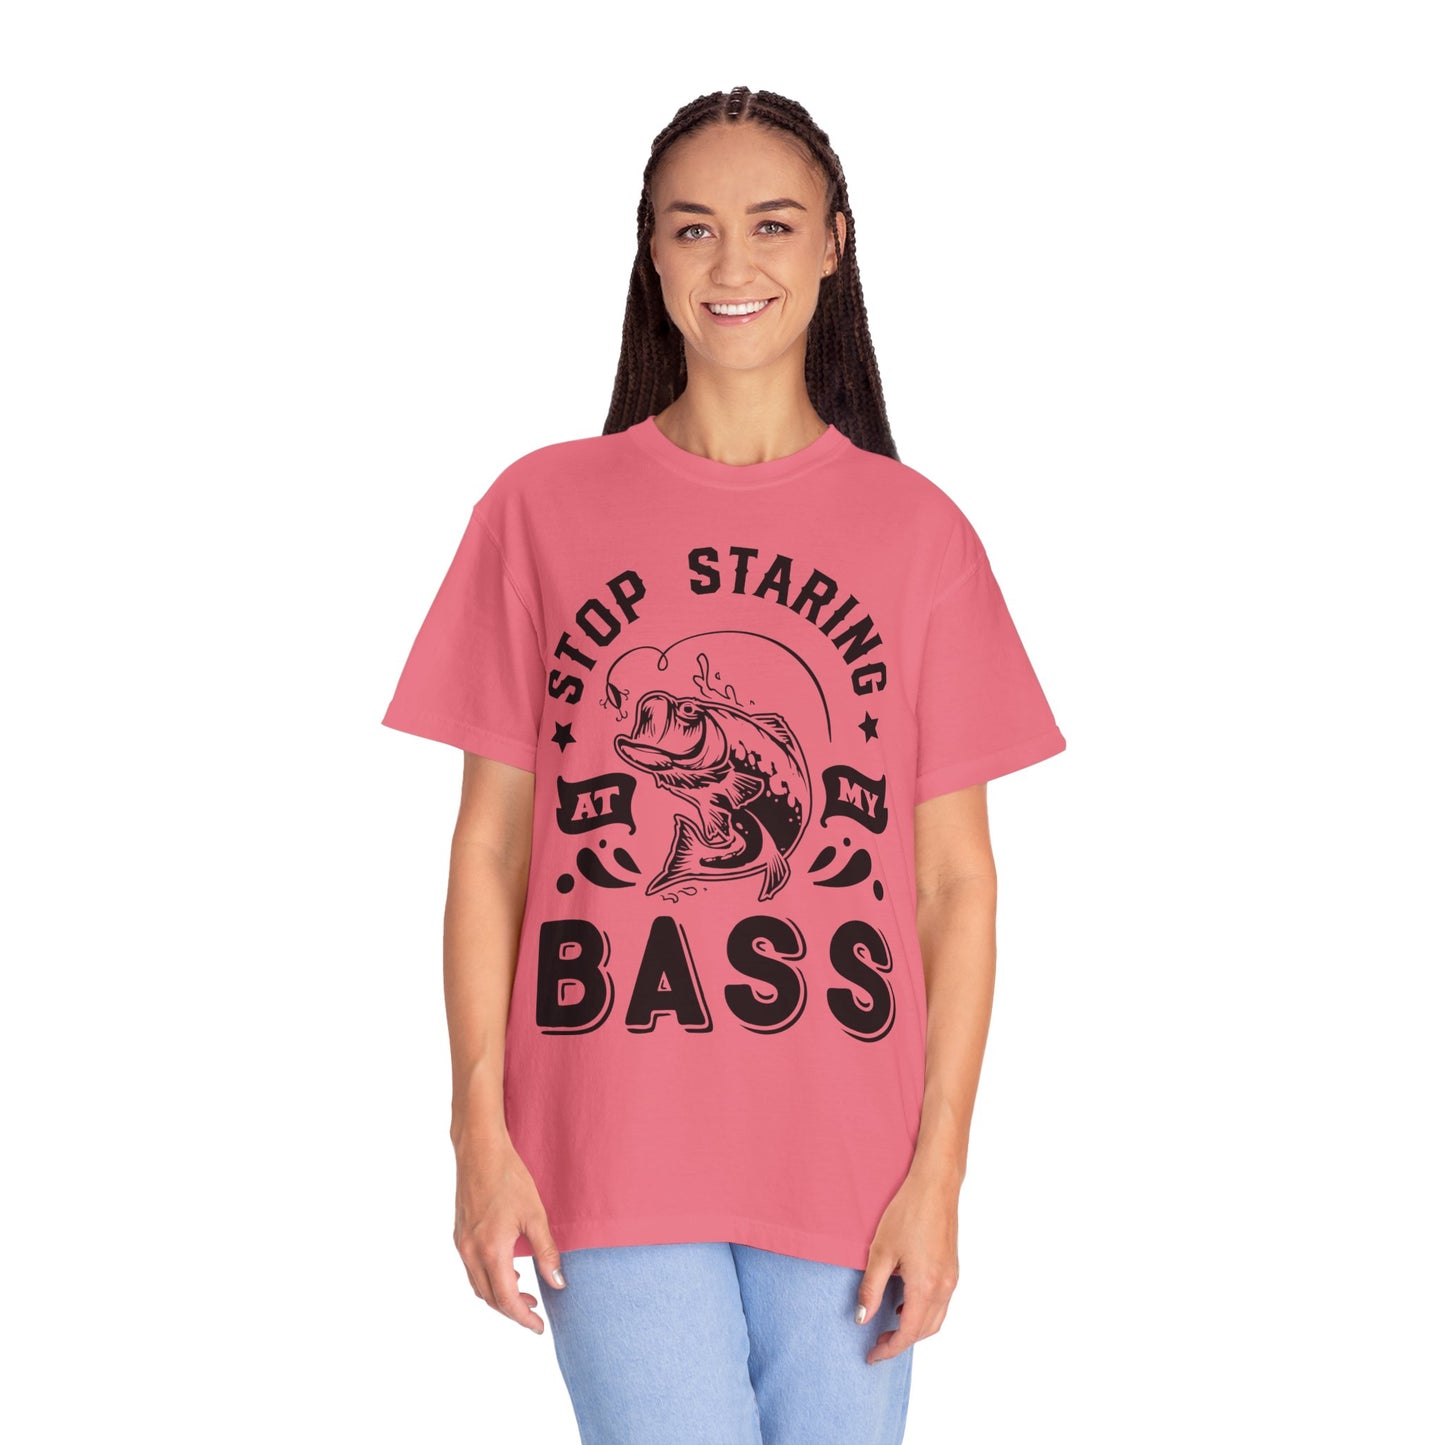 Stop Staring at my Bass: Unisex Garment-Dyed T-shirt